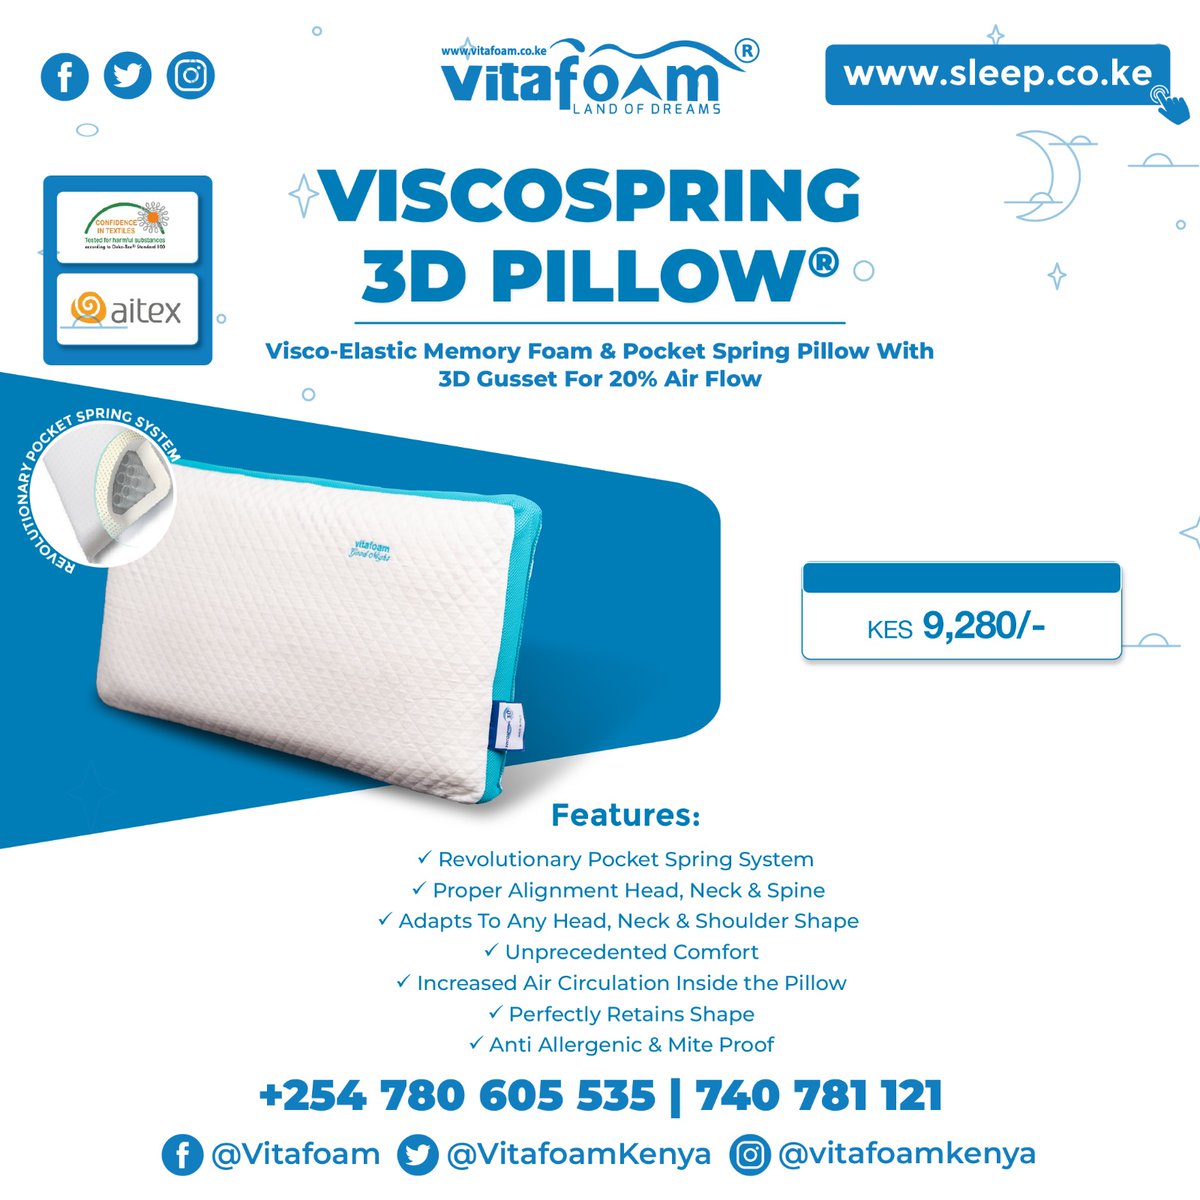 ⭐🙋‍♀️💤☁️ #SleepBetter with our ViscoSpring 3D Pocket Spring Pillow® Exclusively Available at #VitaFoamKenya! ☁️💤🙋‍♂️⭐

☎ For All *Pillow Enquiries, *Orders & *Deliveries Call: +254 780 605 535 | 740 781 121

📍Sleep Centre Locations>>> bit.ly/30VqOrf